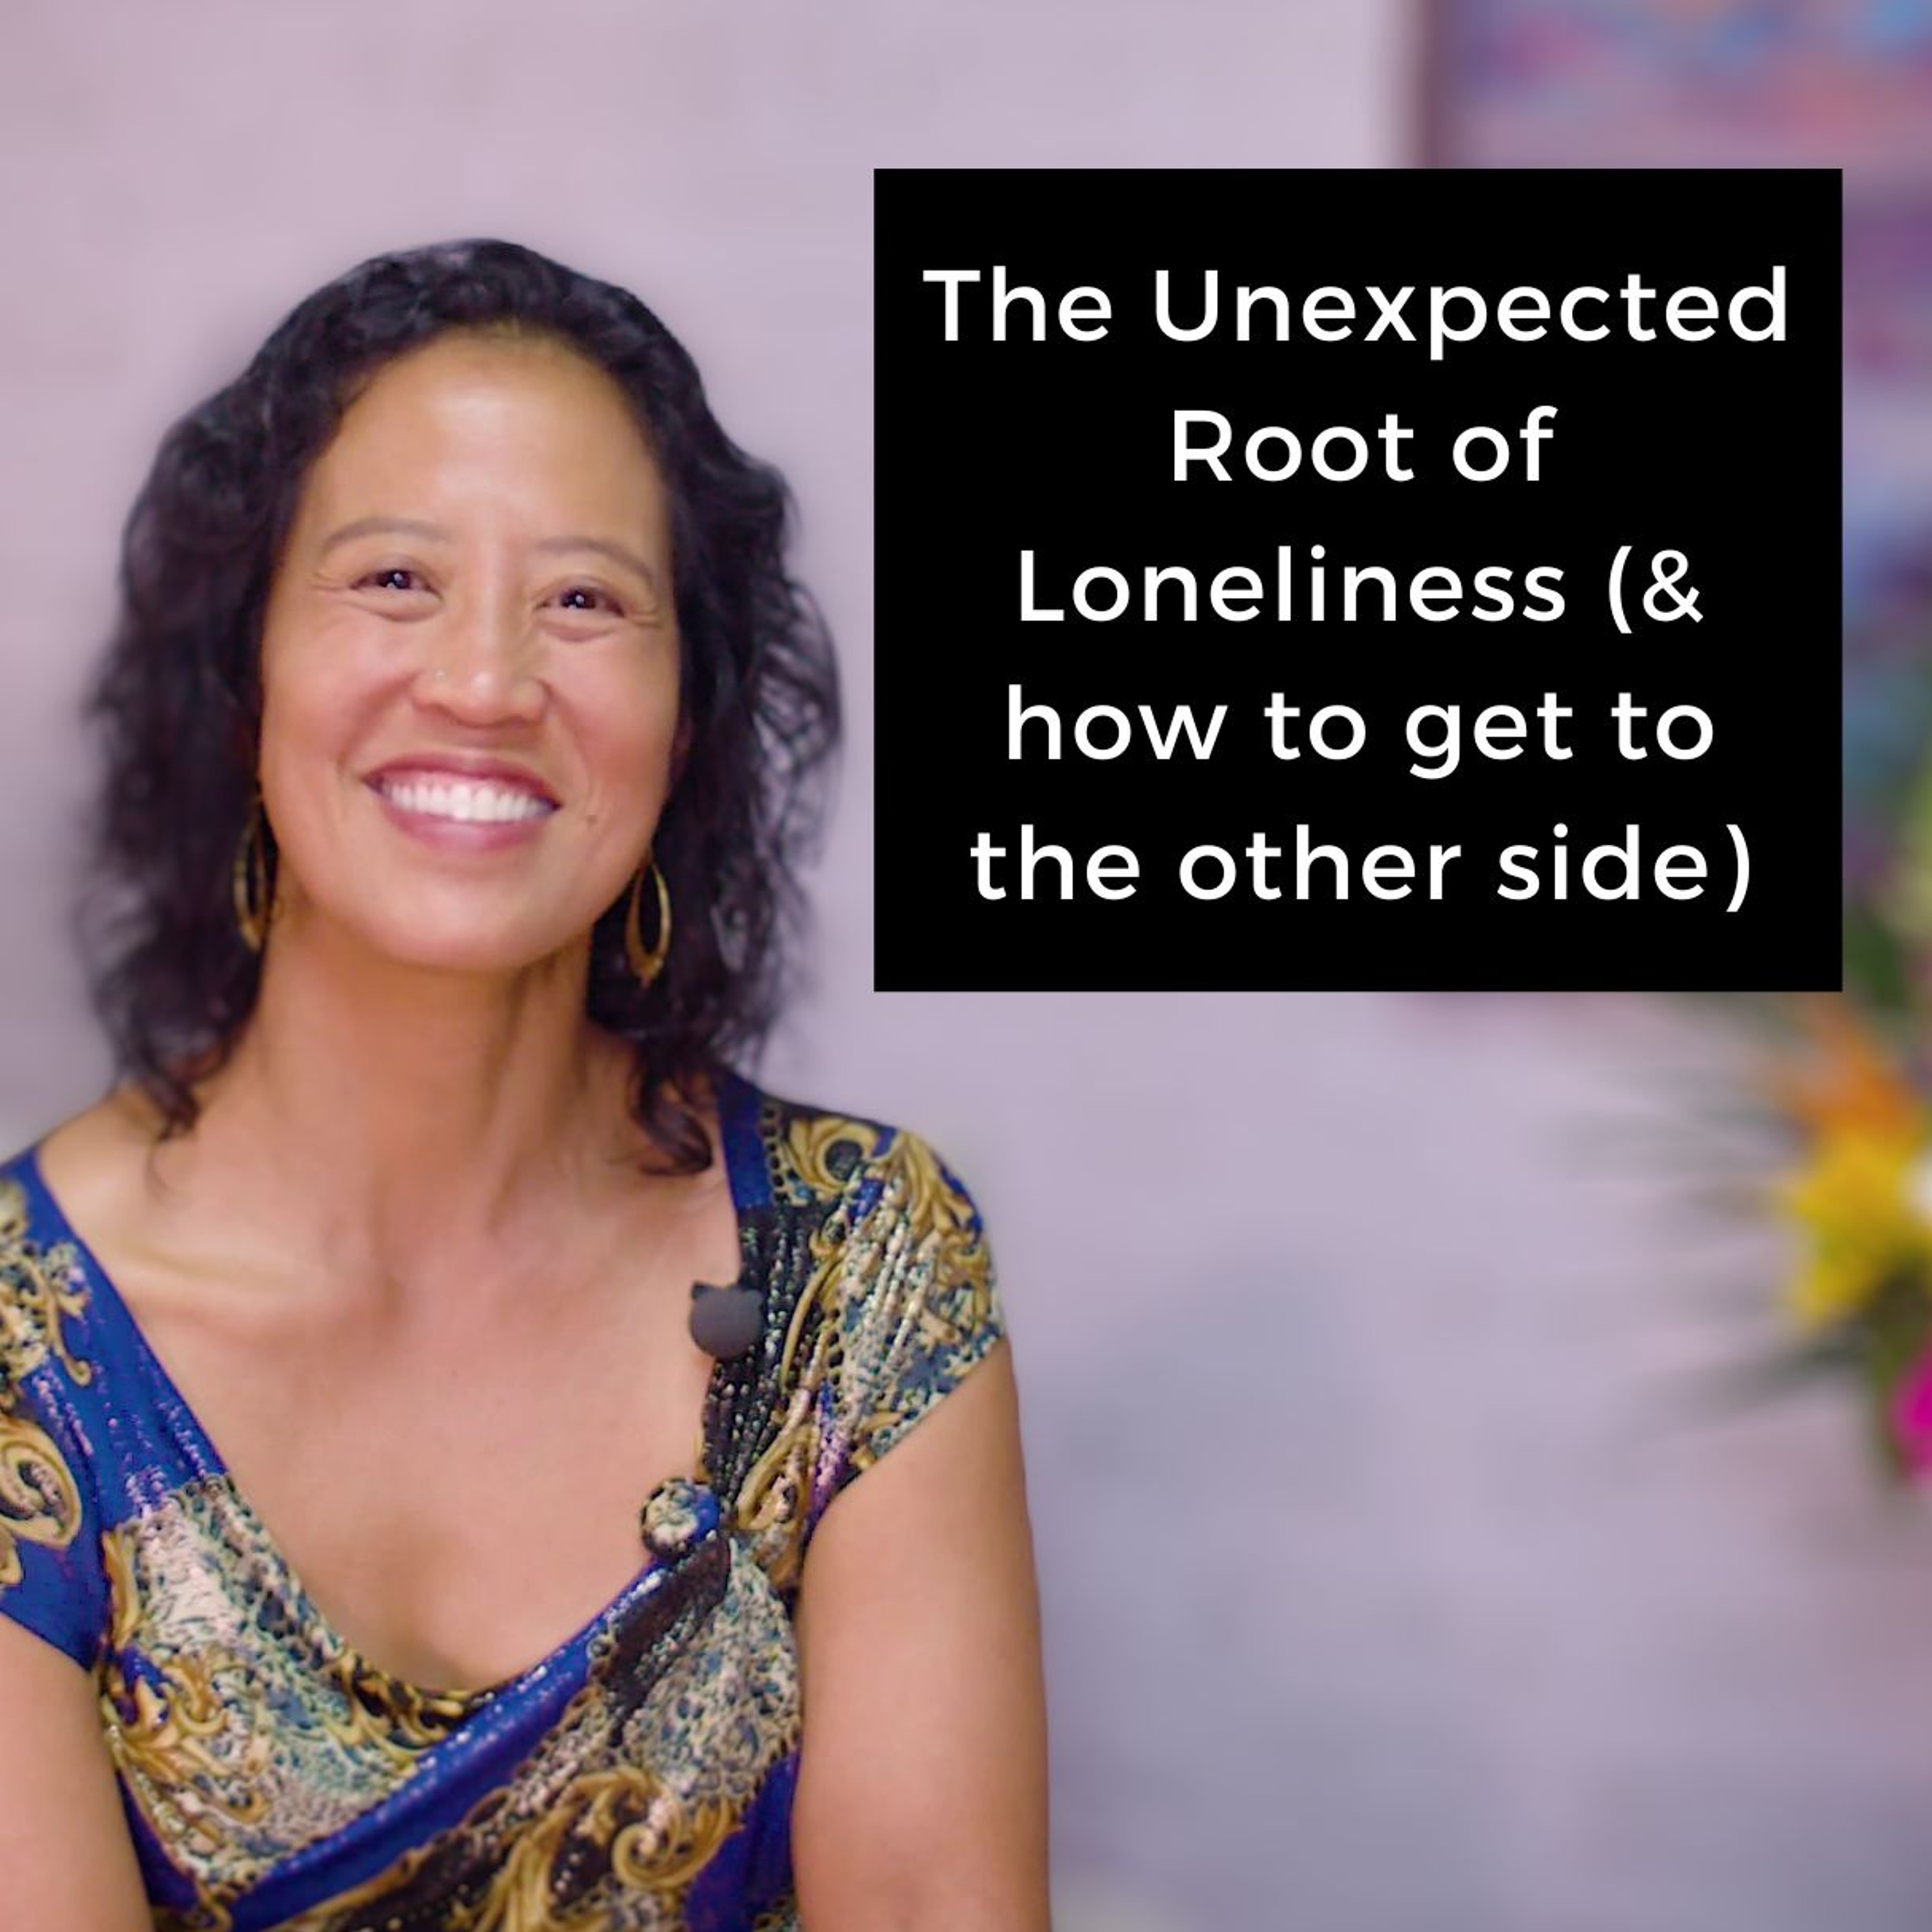 Episode 218 - The Unexpected Root of Loneliness (& how to get to the other side)